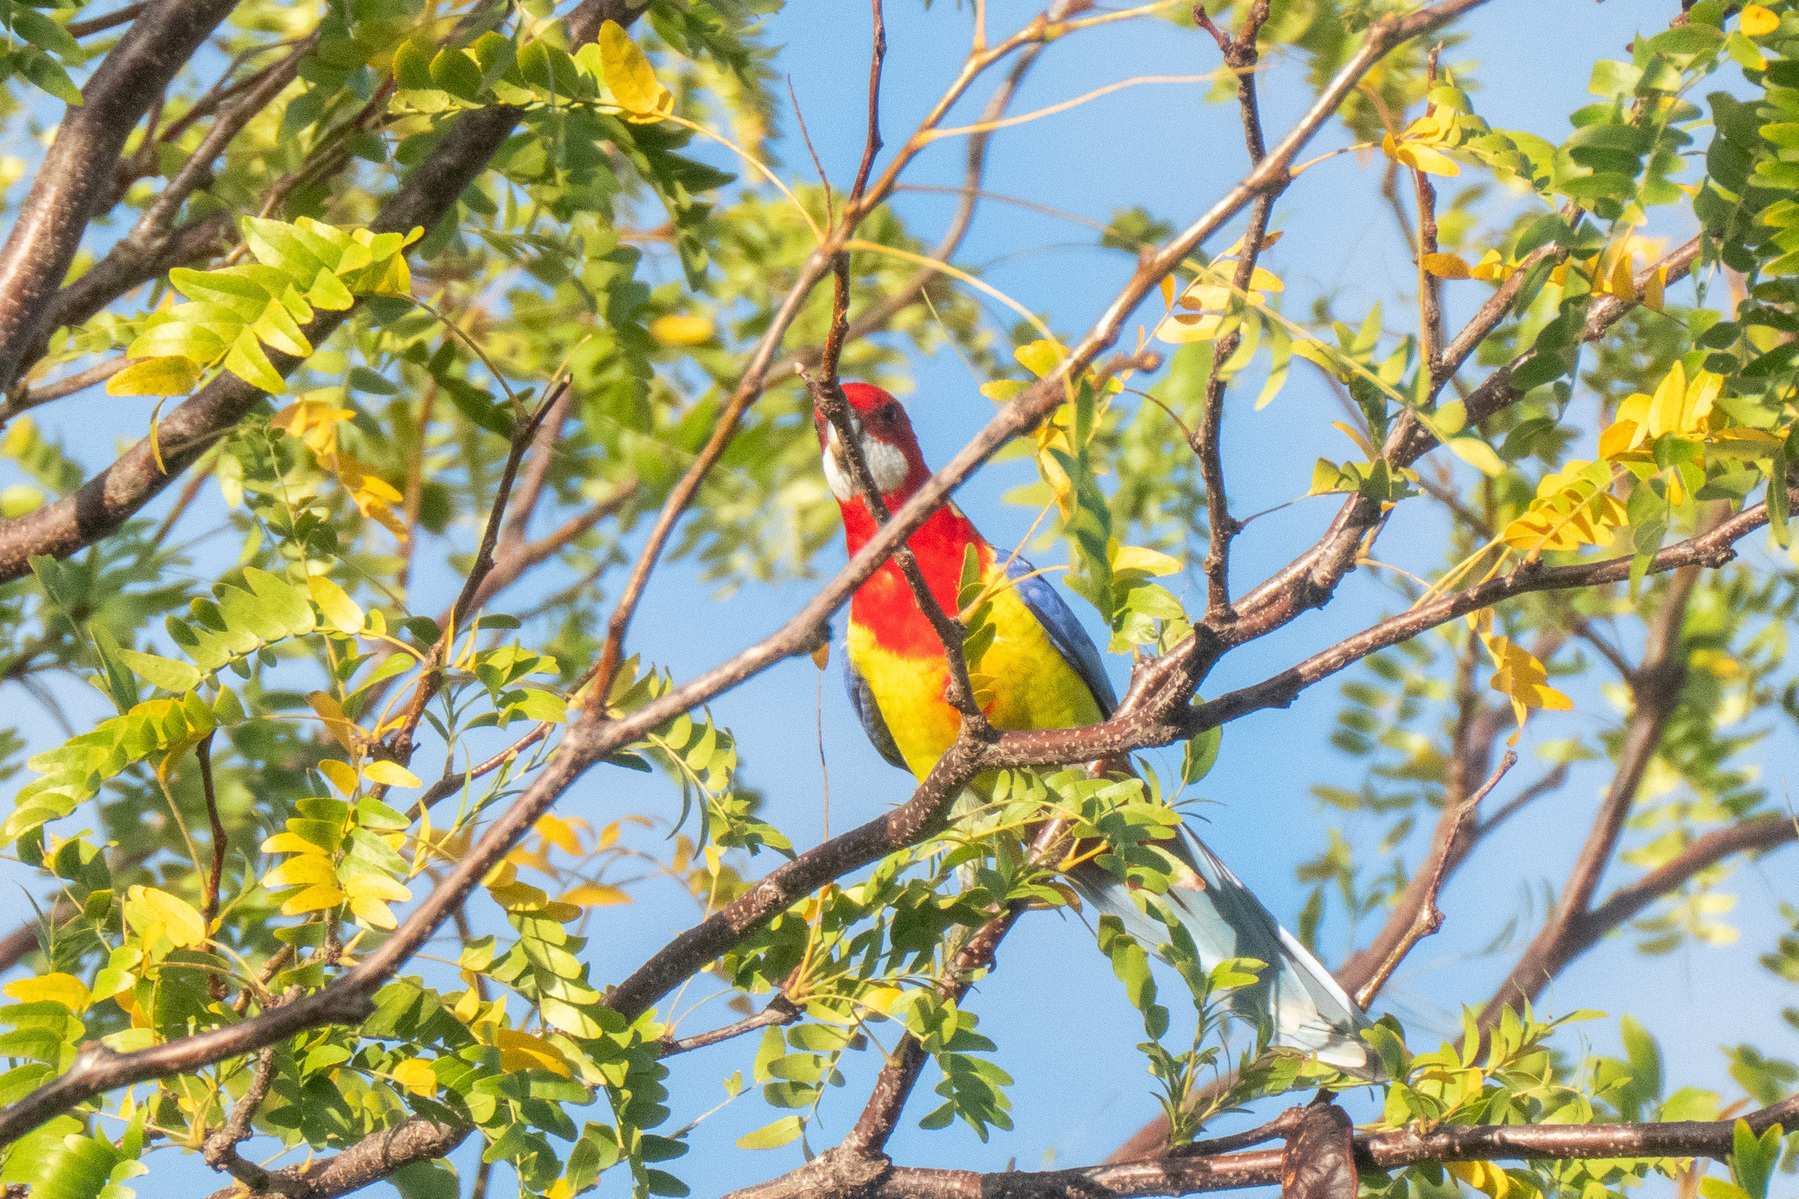 A rosella trying to hide behind a stick in a tree.